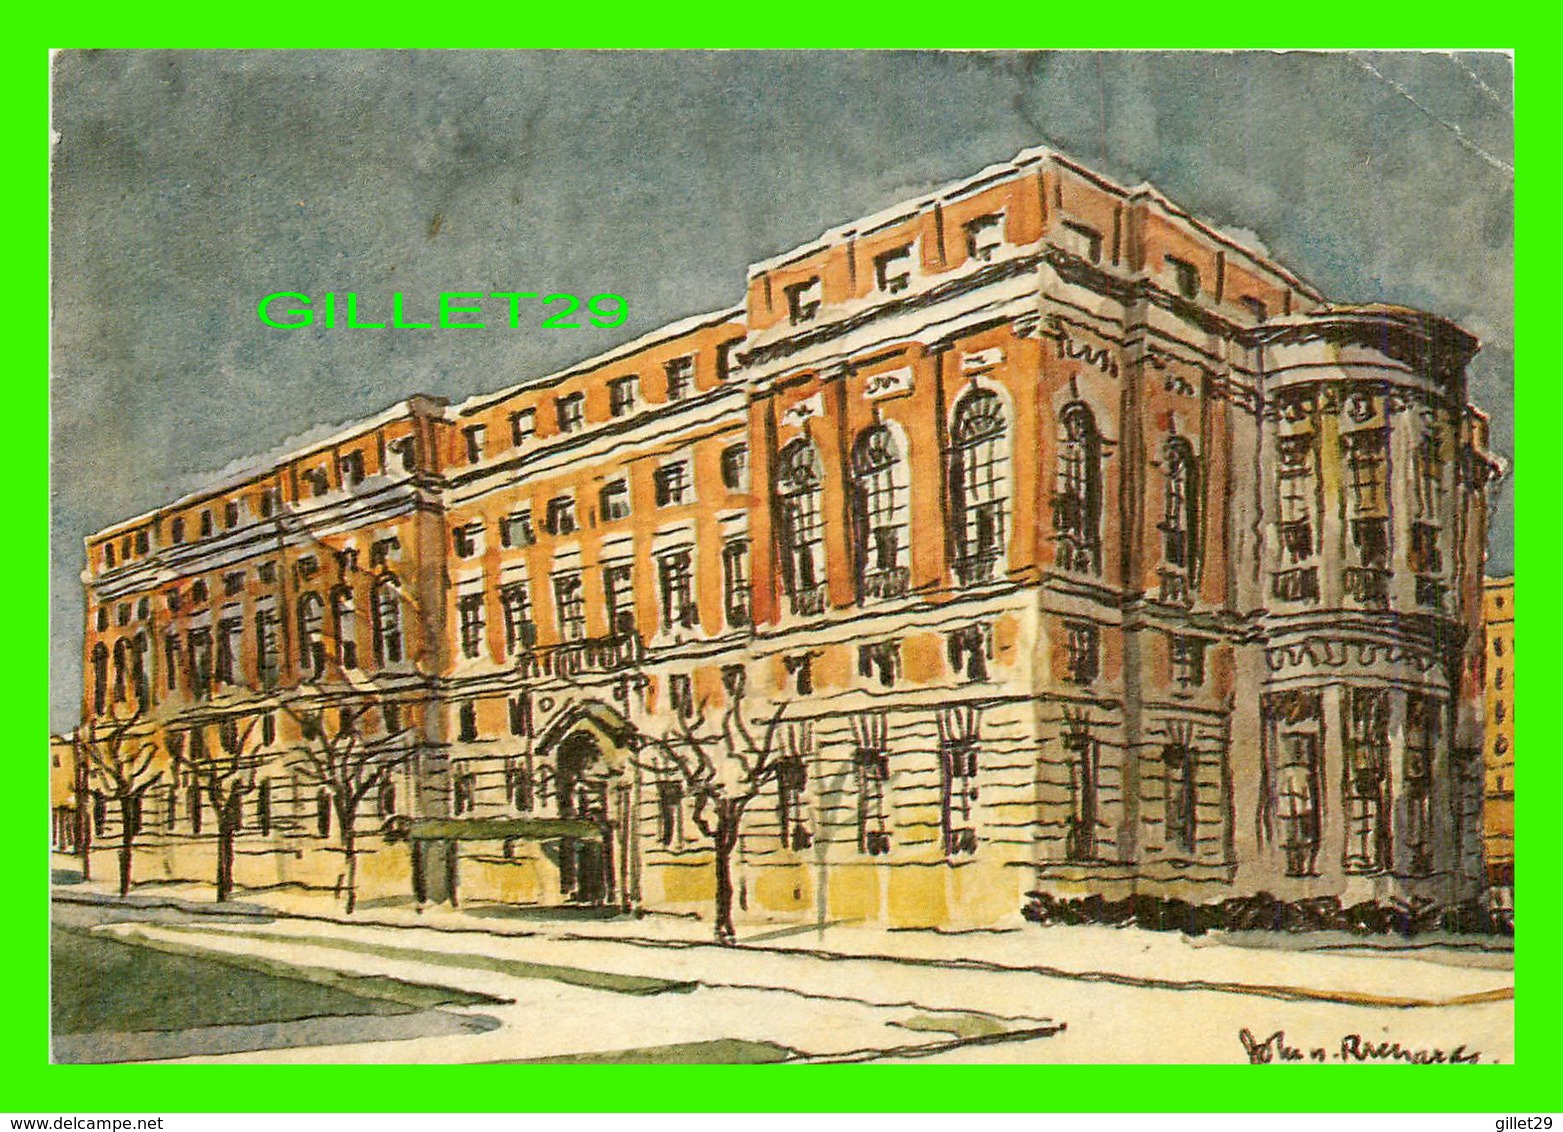 TOLEDO, OHIO - THE TOLEDO CLUB - APRIVATE CITY CLUB FOUNDED IN 1889 - WATERCOLOR BY JOHN NOBLE RICHARDS - - Toledo